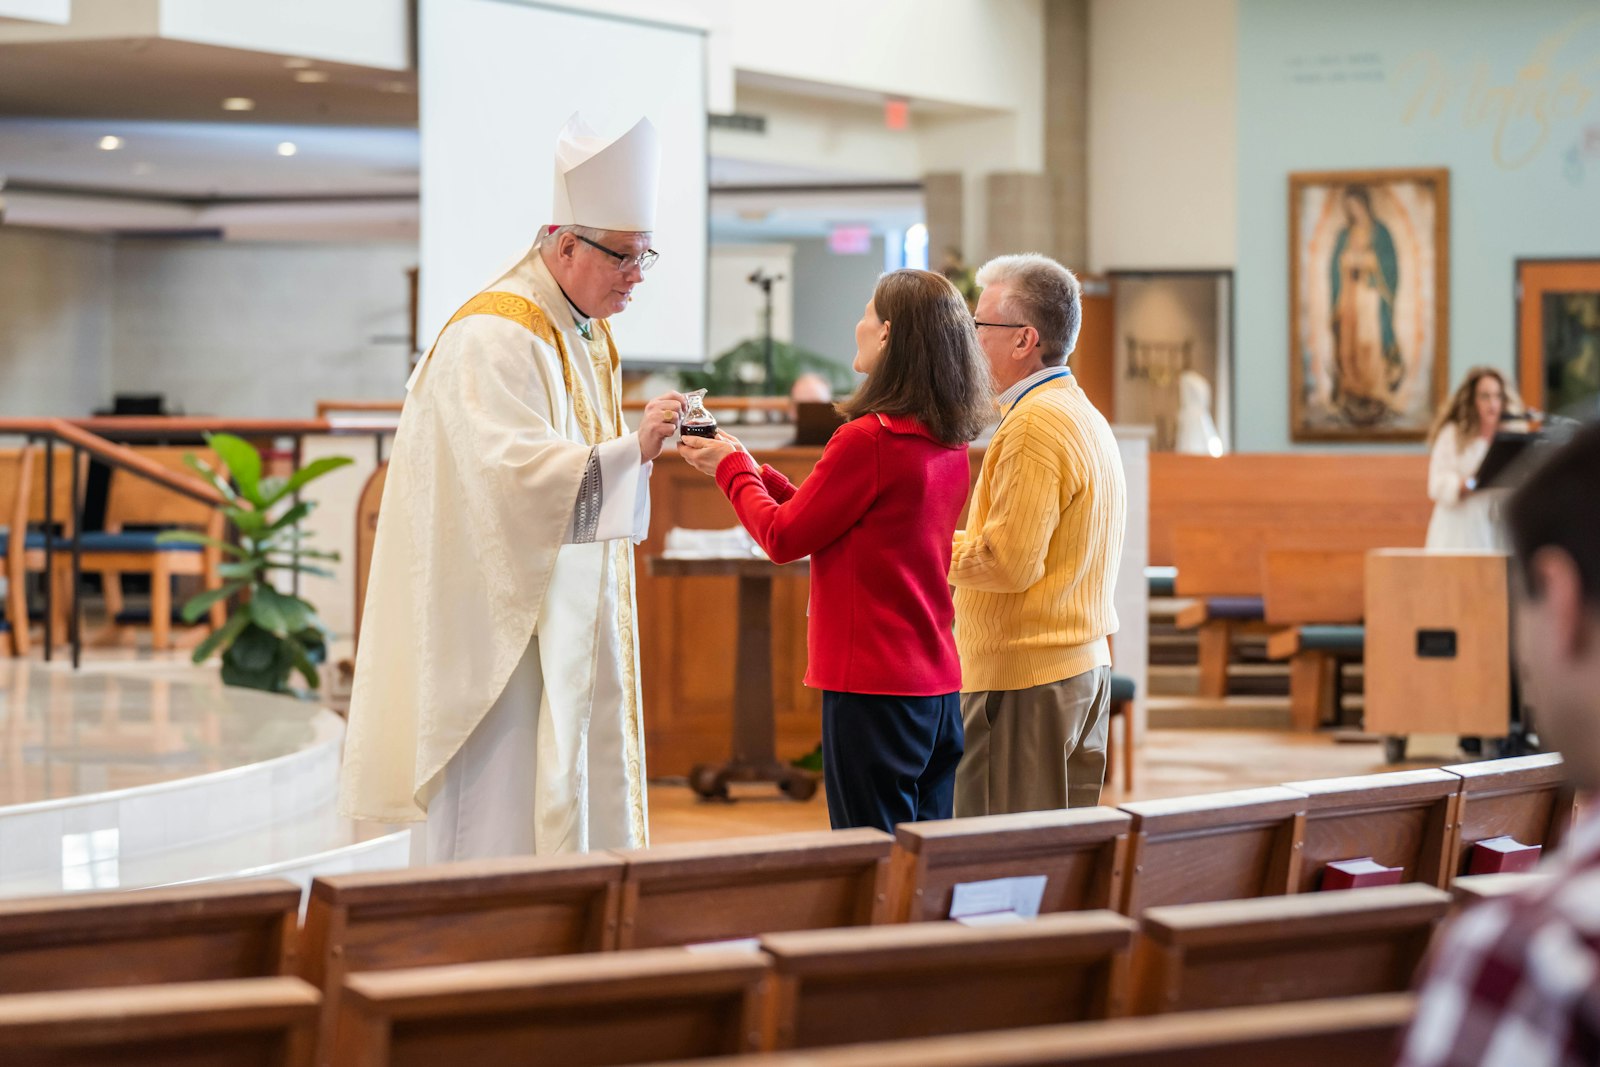 Auxiliary Bishop Gerard W. Battersby accepts the gifts of the altar from a couple during Mass to begin the conference. Bishop Battersby offered a blessing for approximately 60 couples who attended the conference.